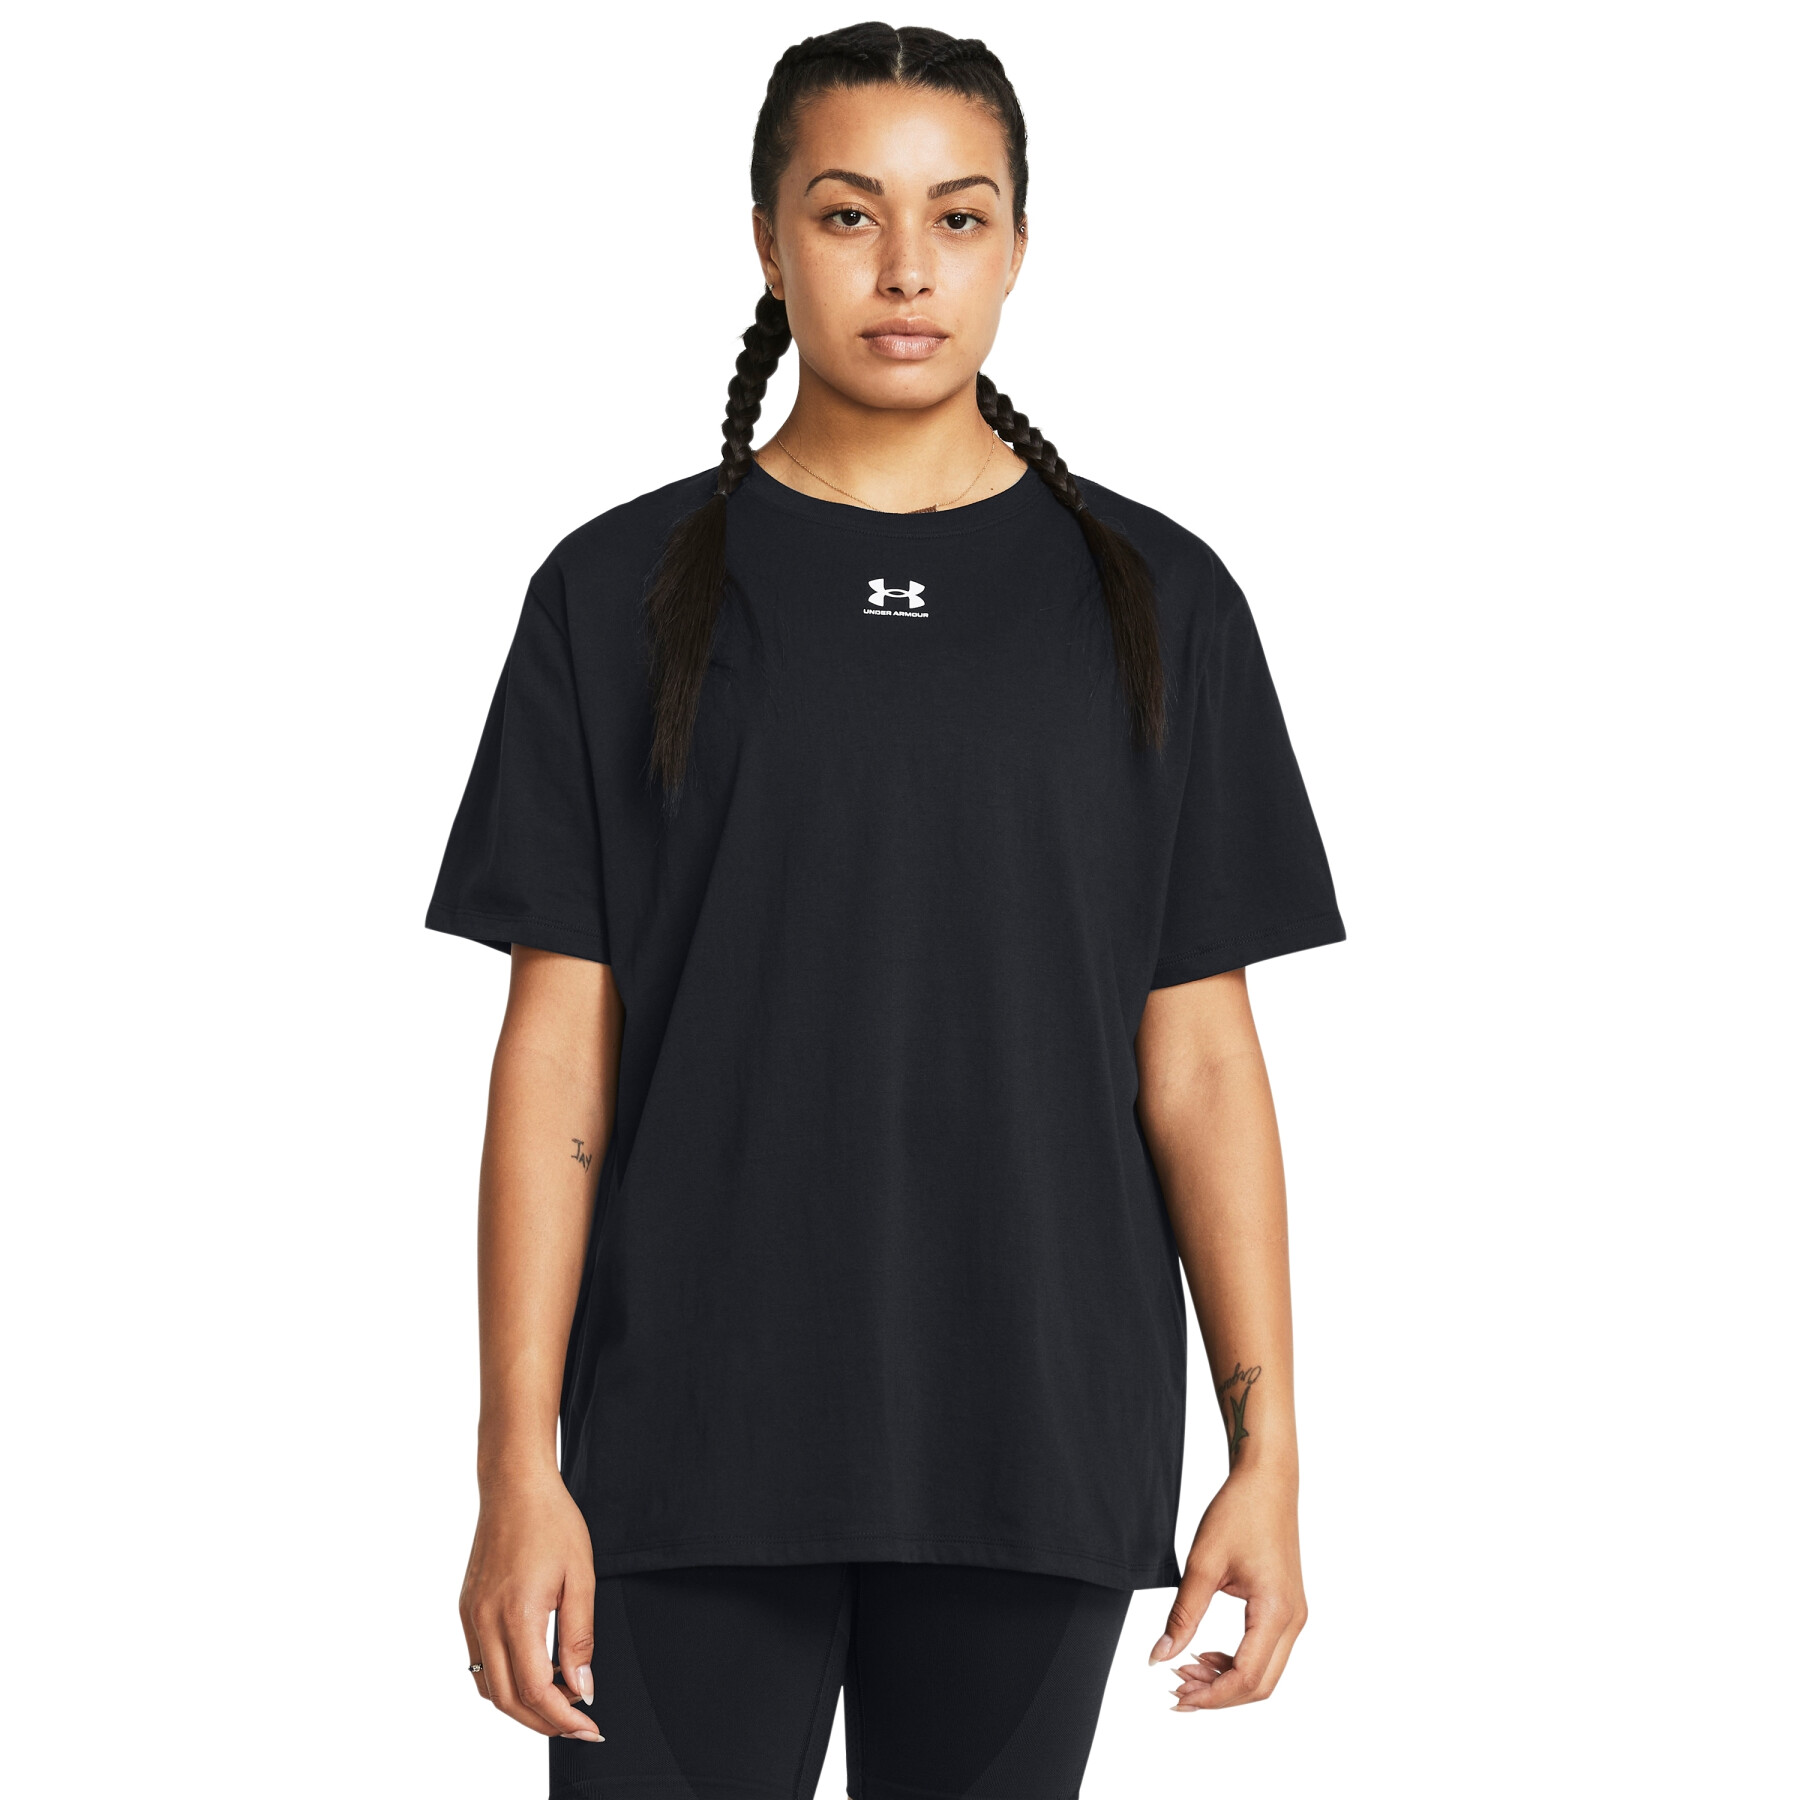 Dames-T-shirt oversized Under Armour Campus